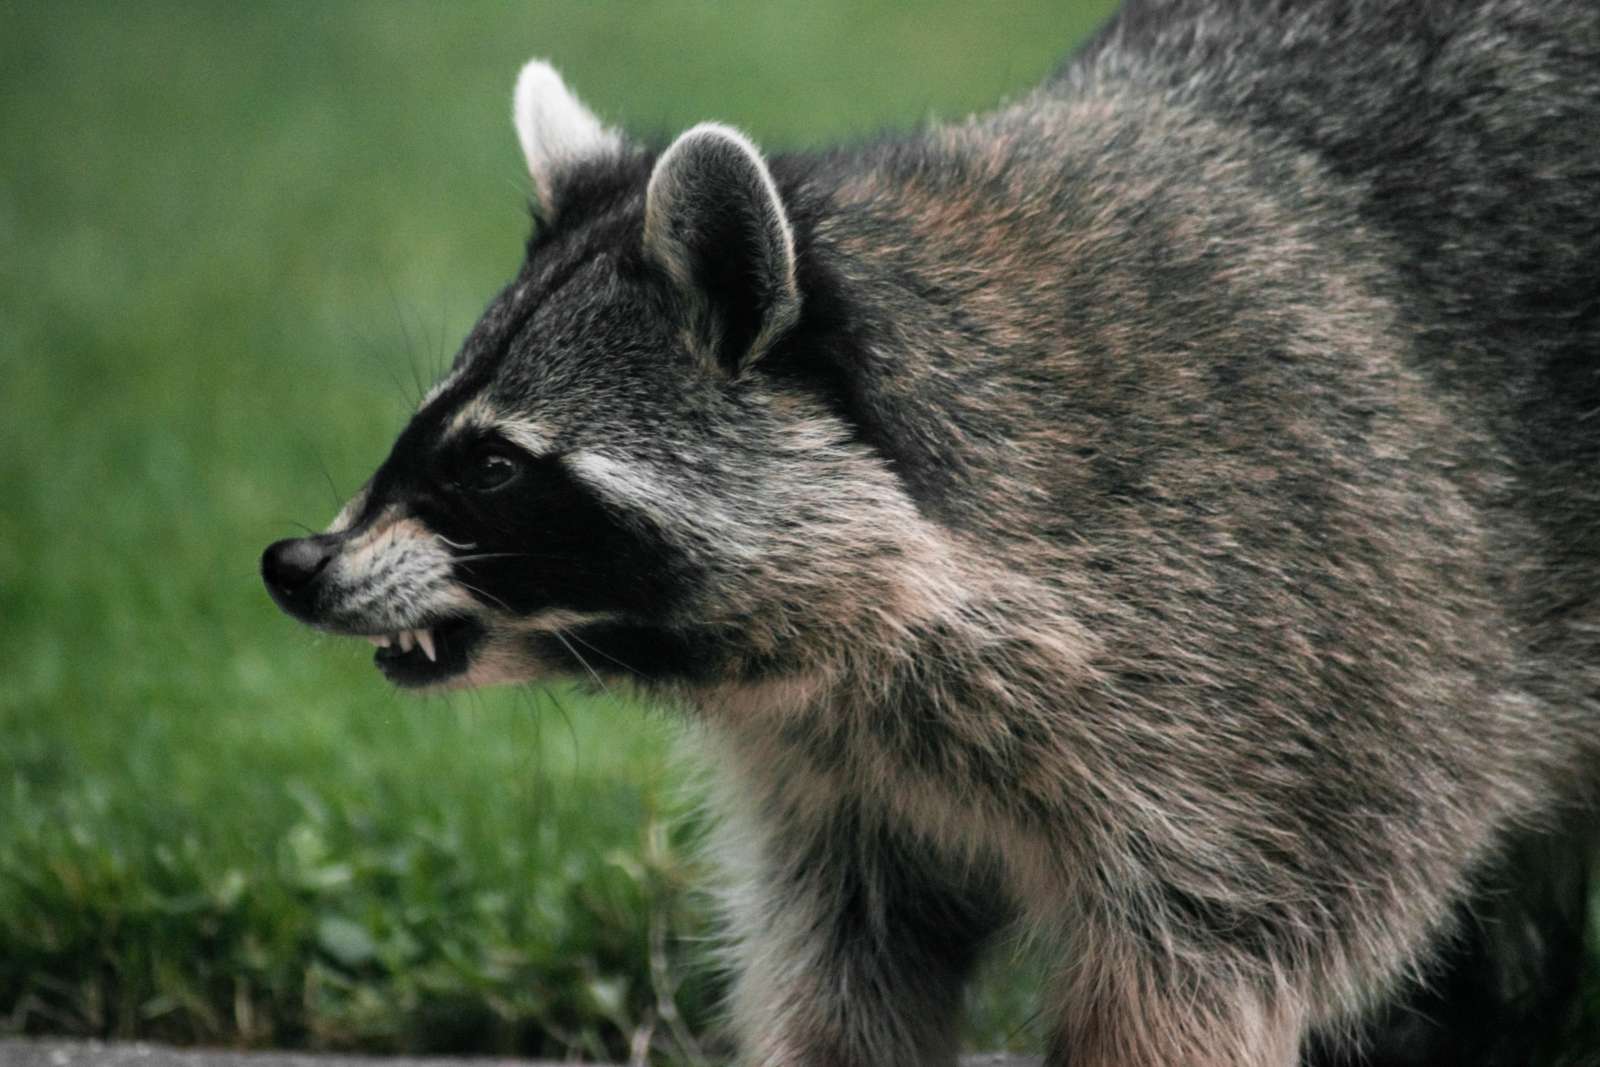 NEW: Viral Outbreak Among Raccoons Prompts Warning for Pet Owners | ARLnow.com